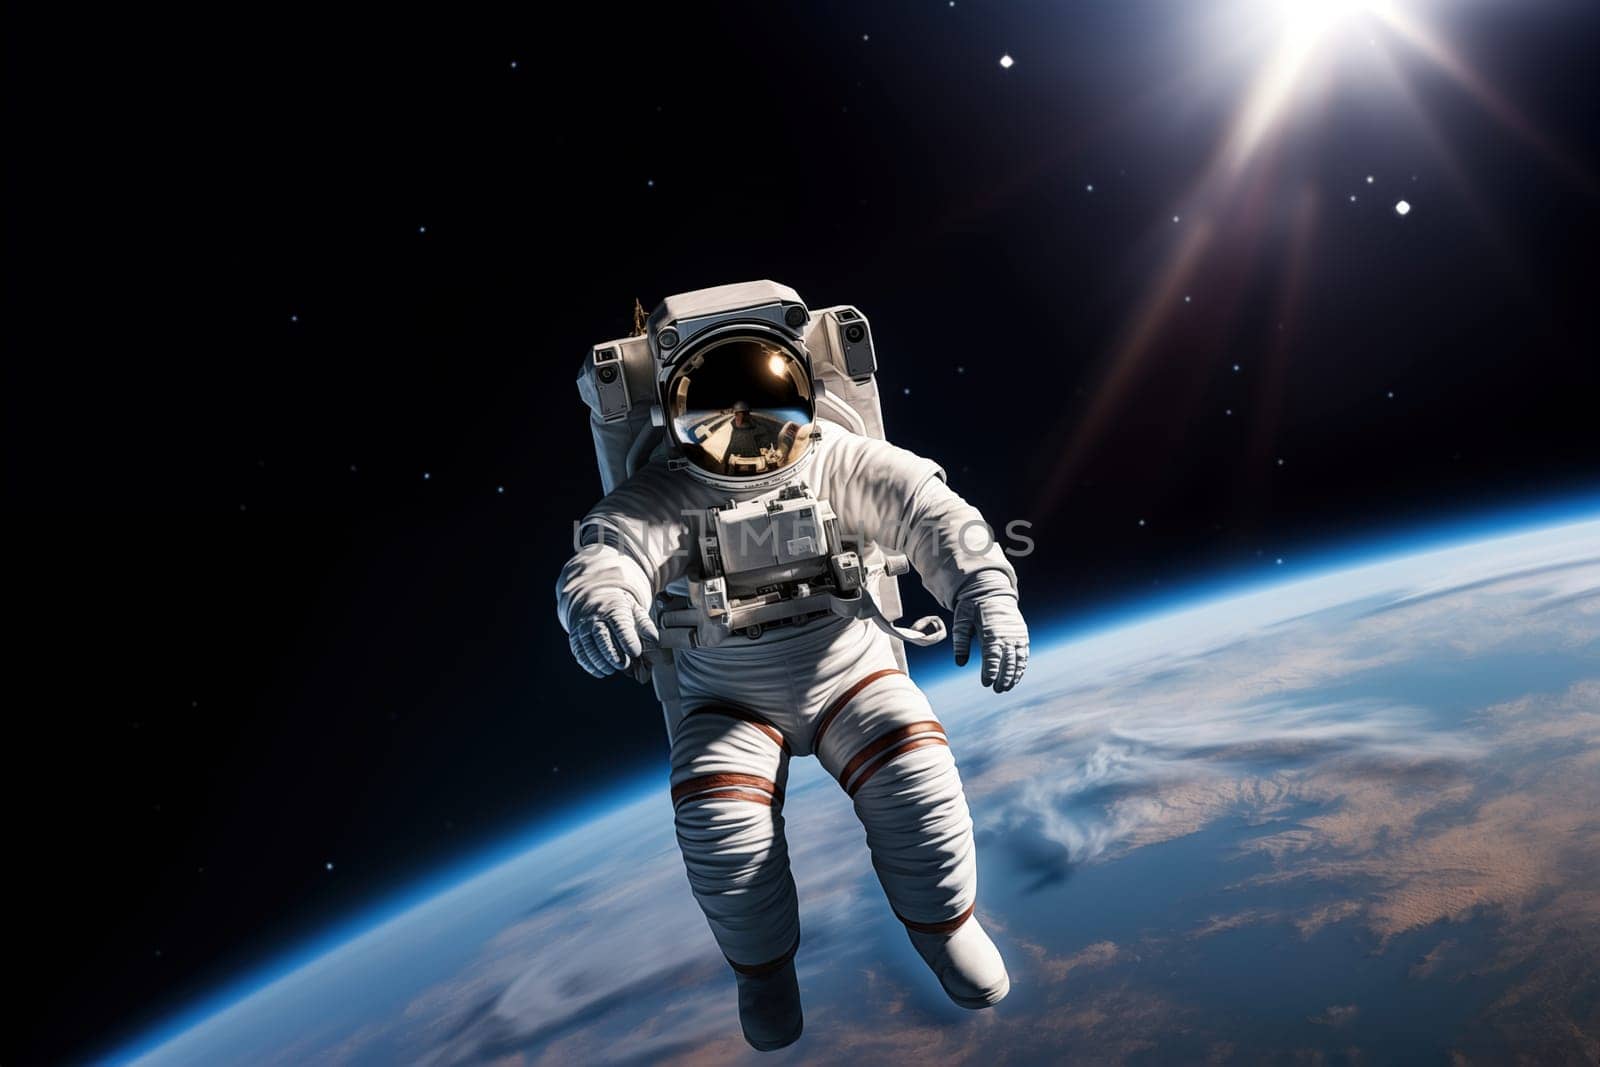 Astronaut Floating Above Earth in Space with extravehicular mobility unit and backpack. Wonder and awe of space exploration and science